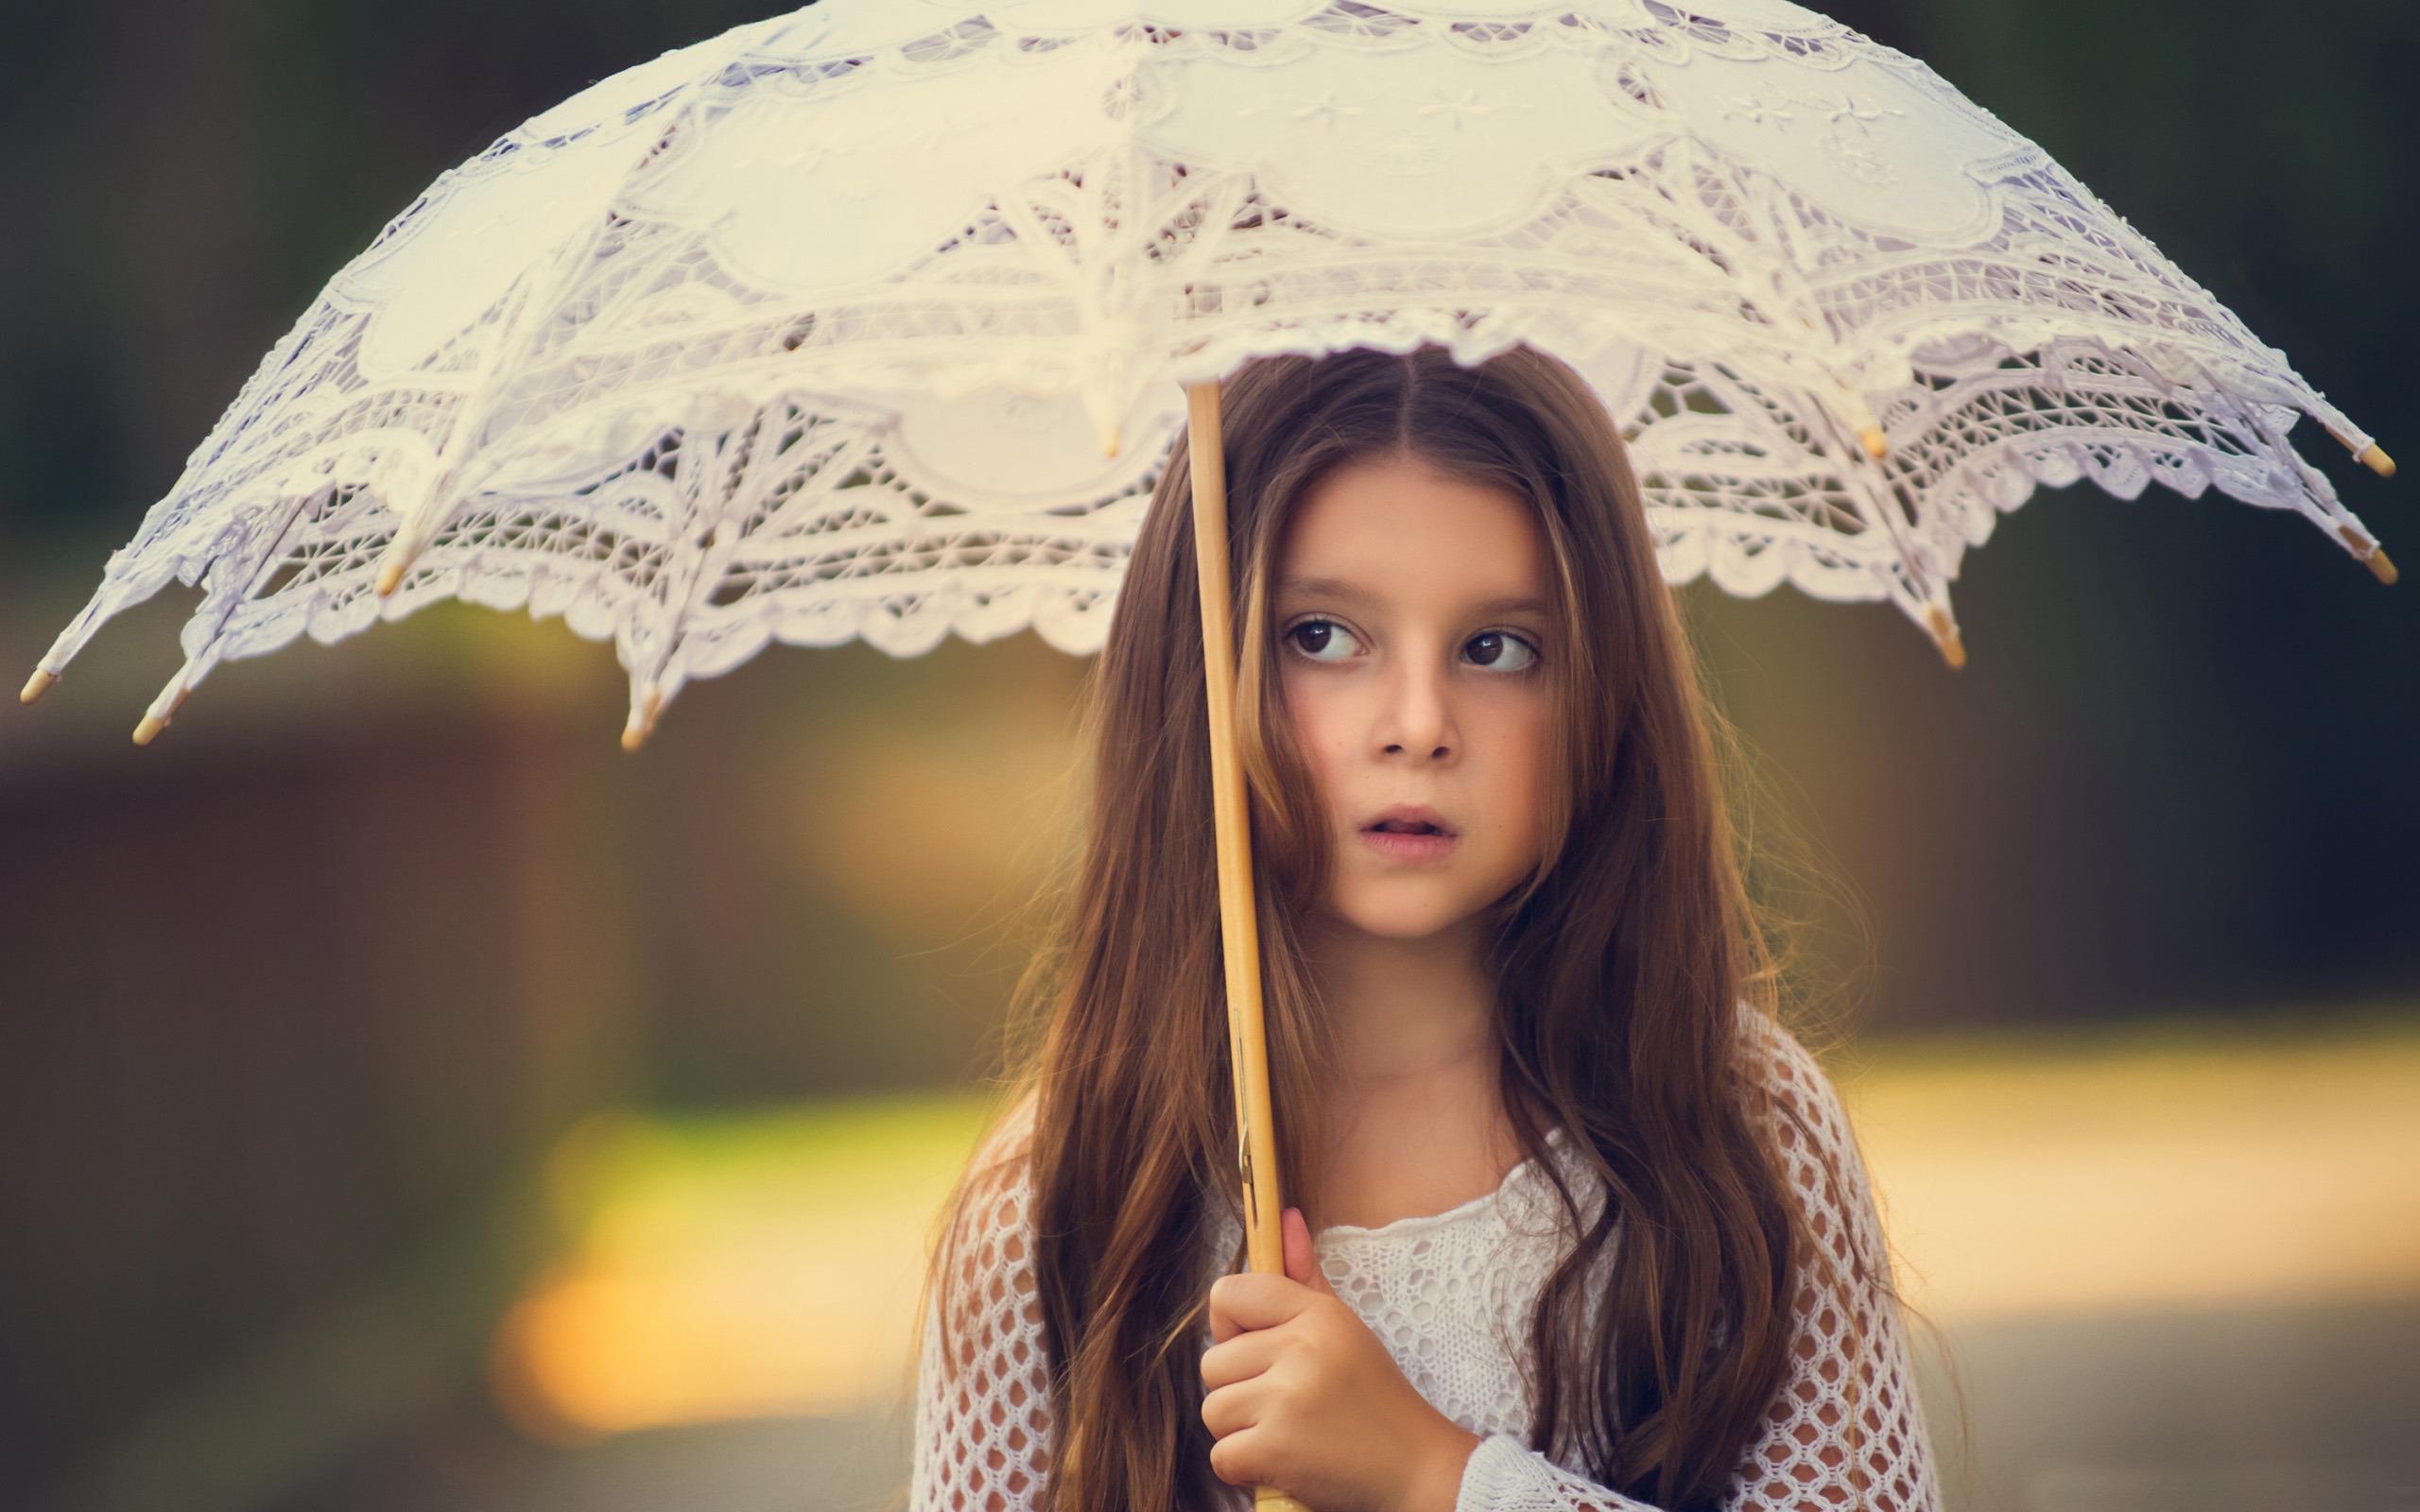 A little girl under a white umbrella looks away in surprise